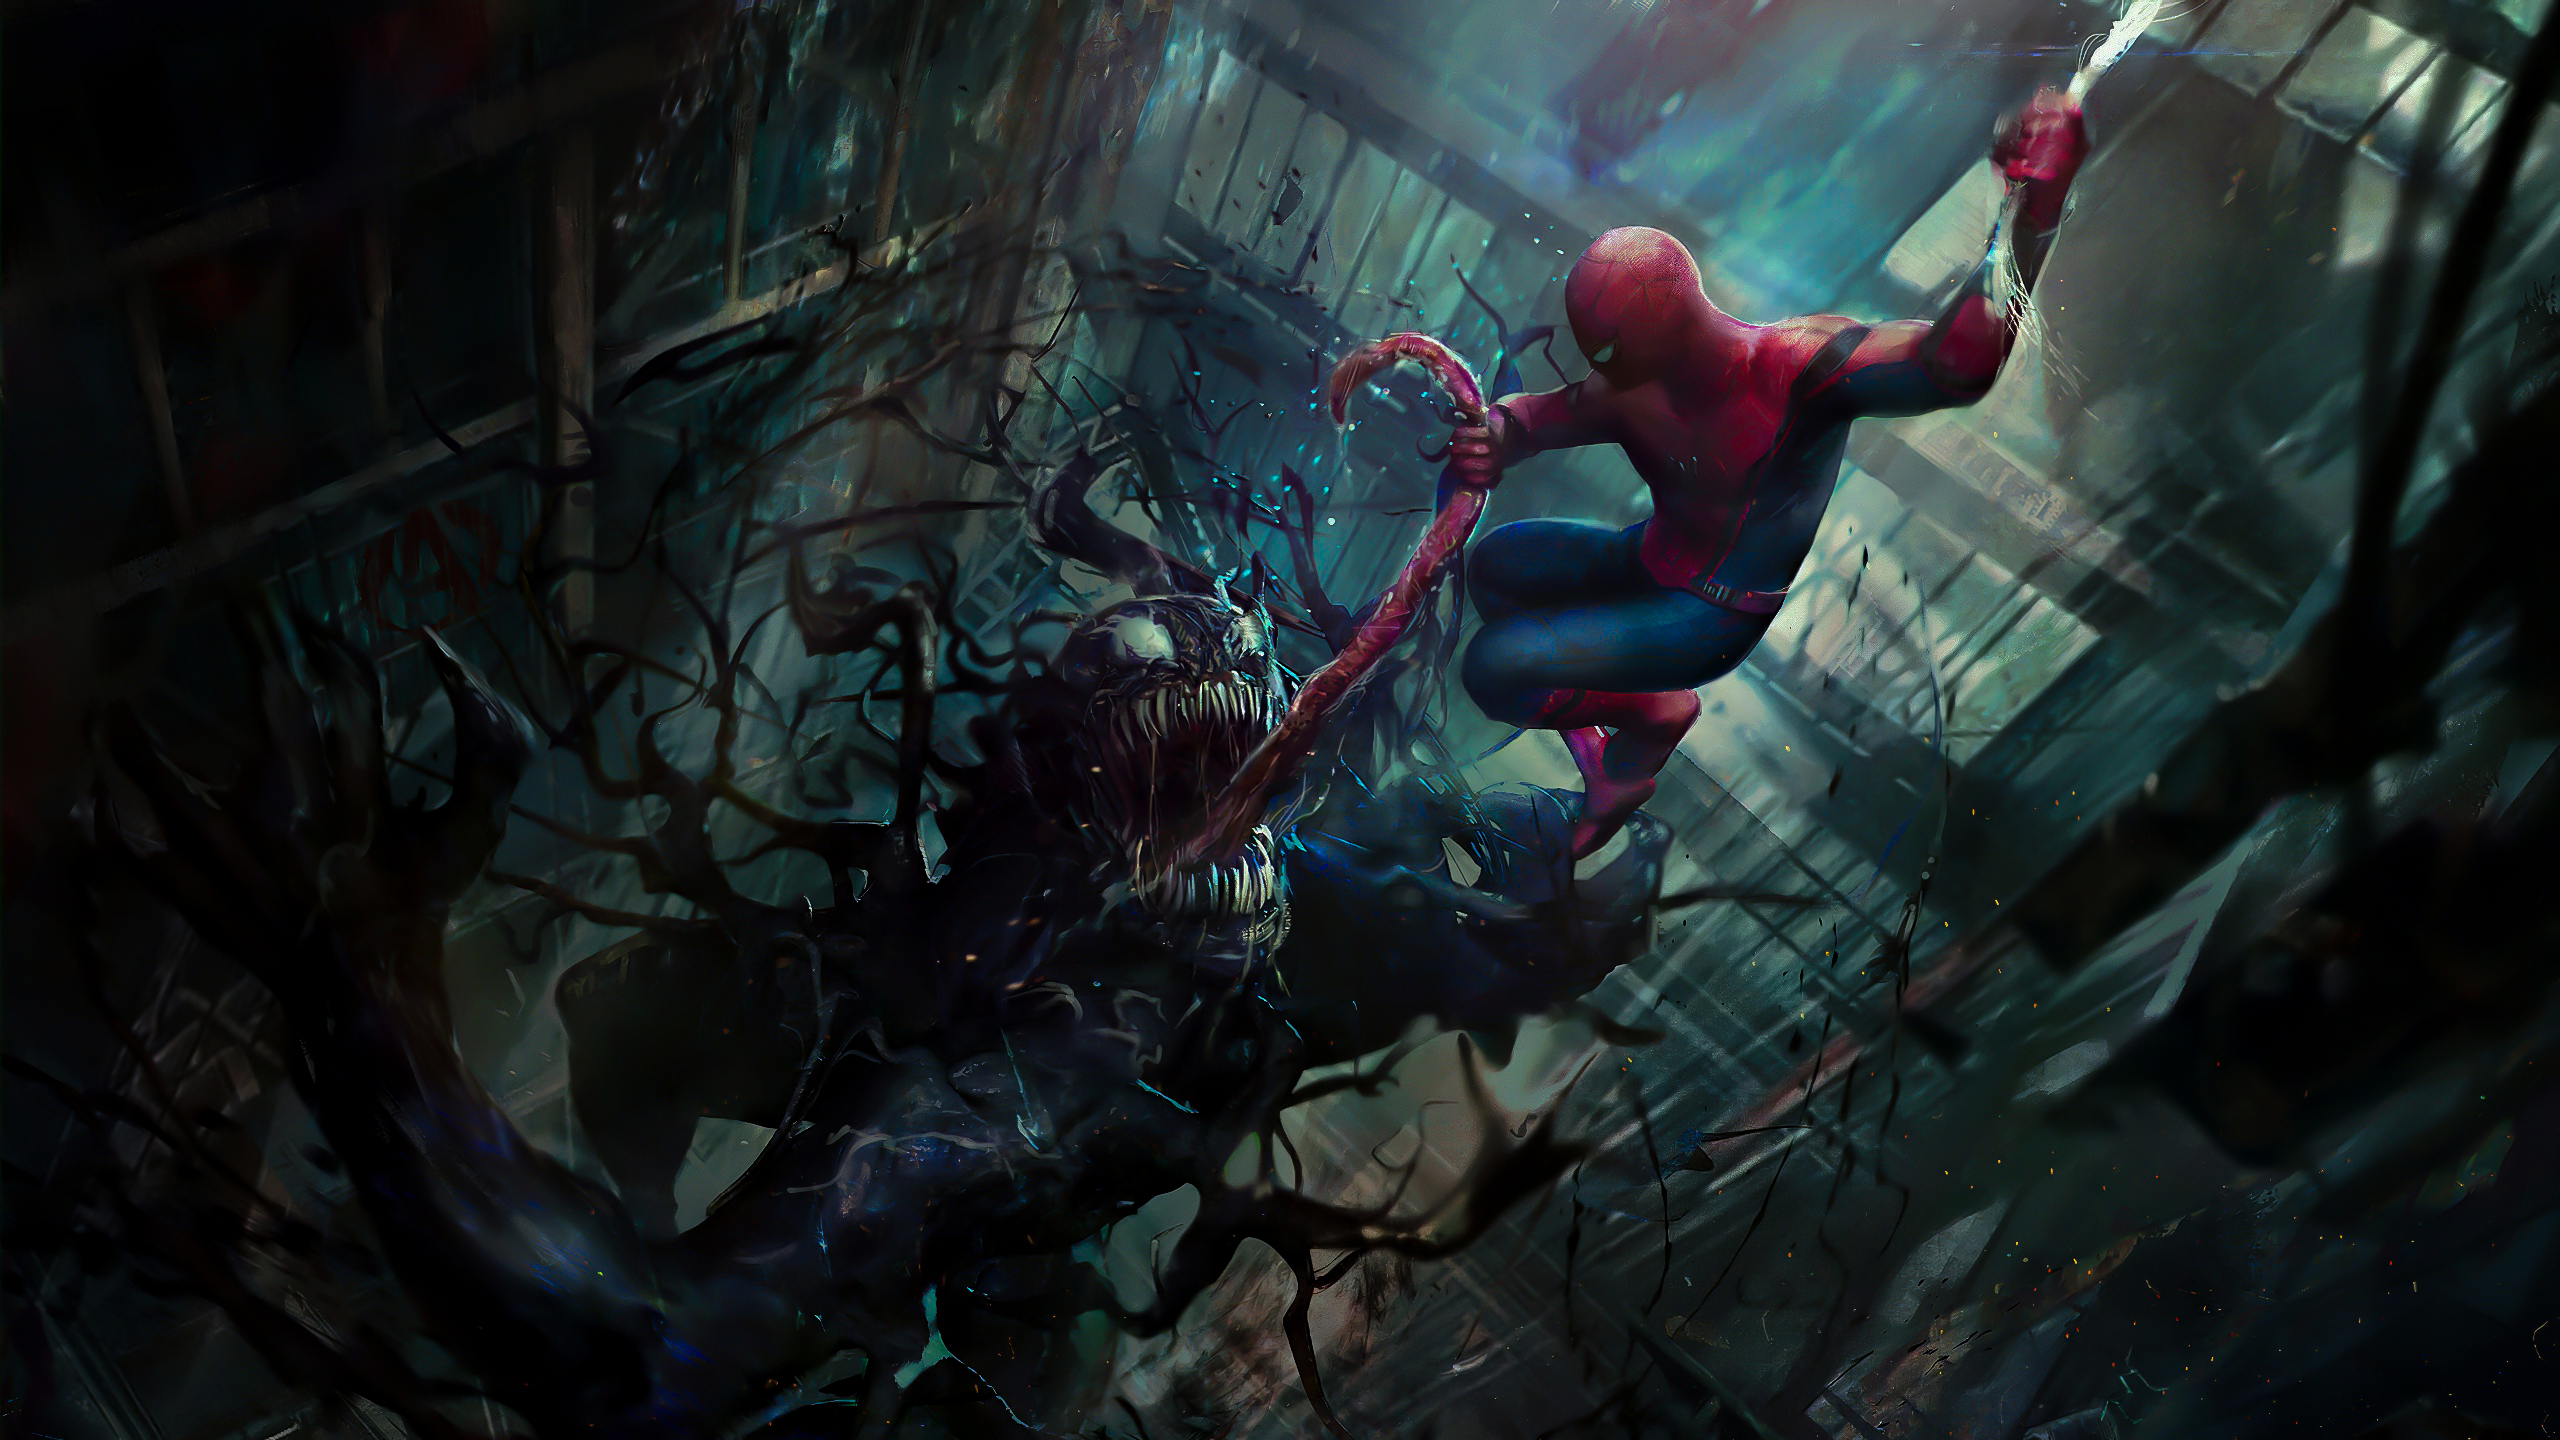 Illustration with Spider-Man fighting versus Venom. It's a cool image to use as background wallpaper on laptop and PC Desktop.